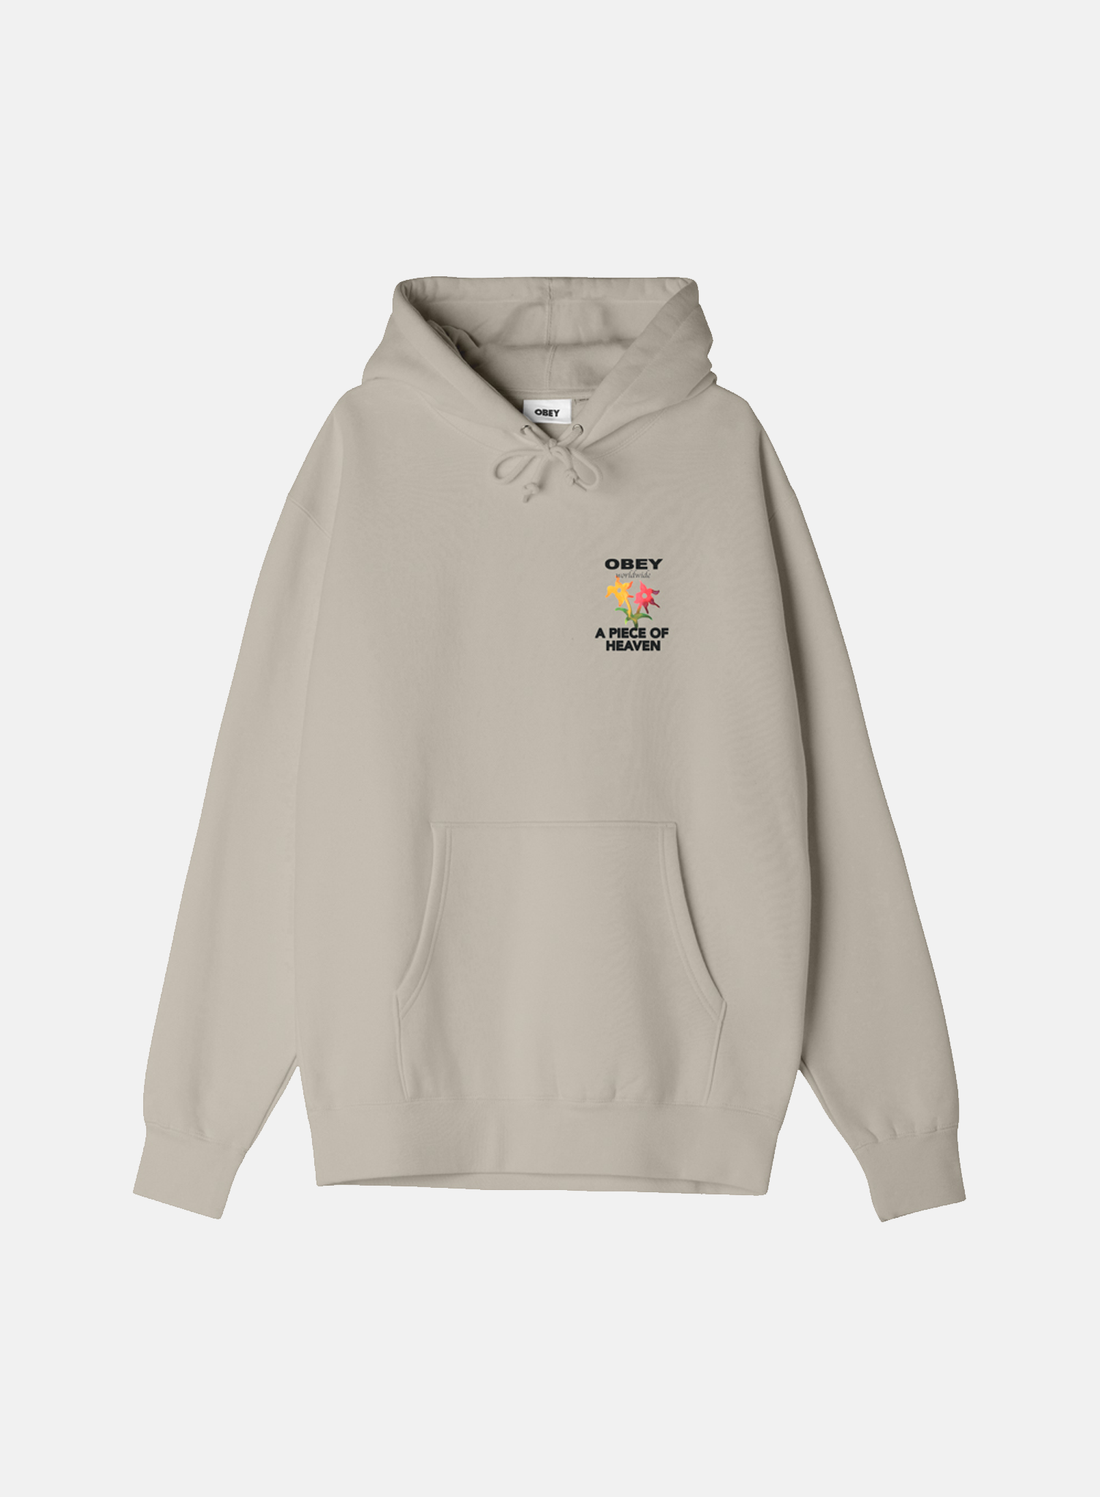 OBEY A Piece Of Heaven Hoodie - Hympala Store 